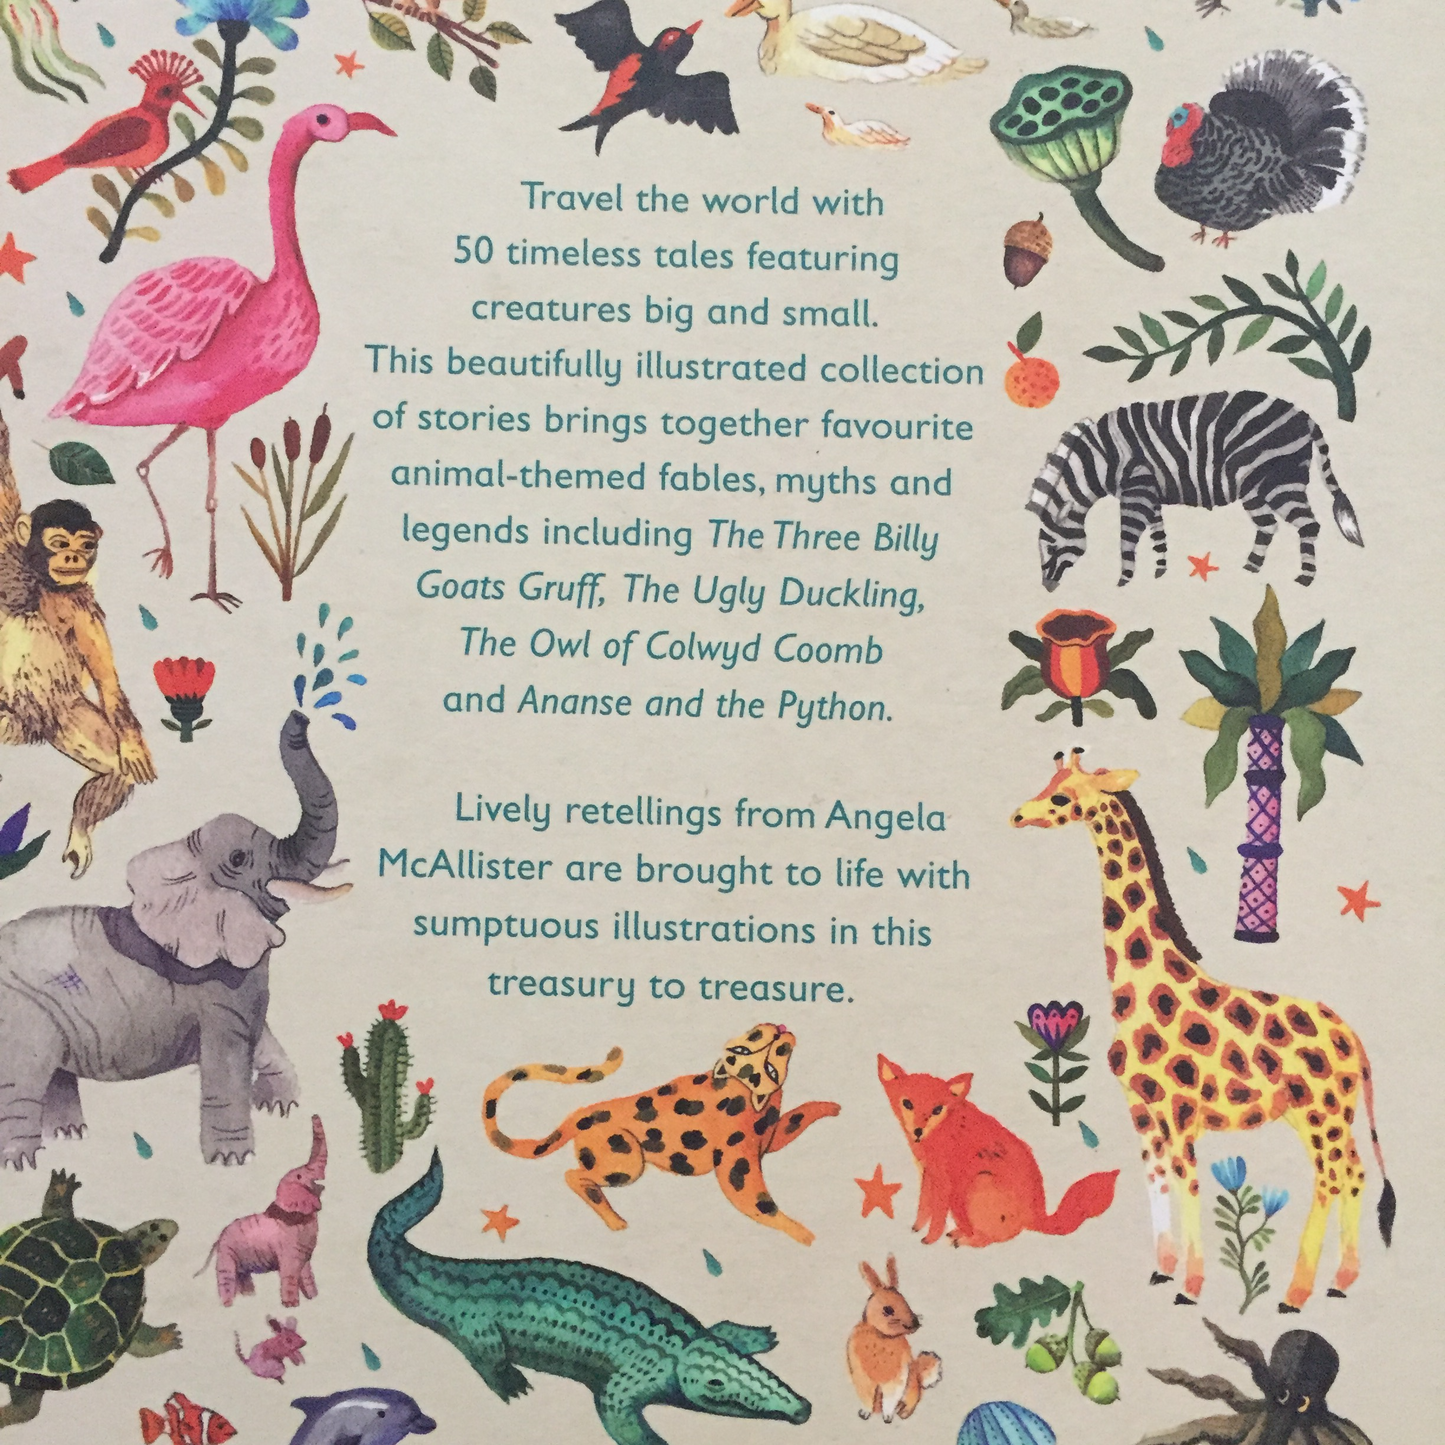 Educational Chapter Book - A WORLD FULL OF ANIMAL STORIES